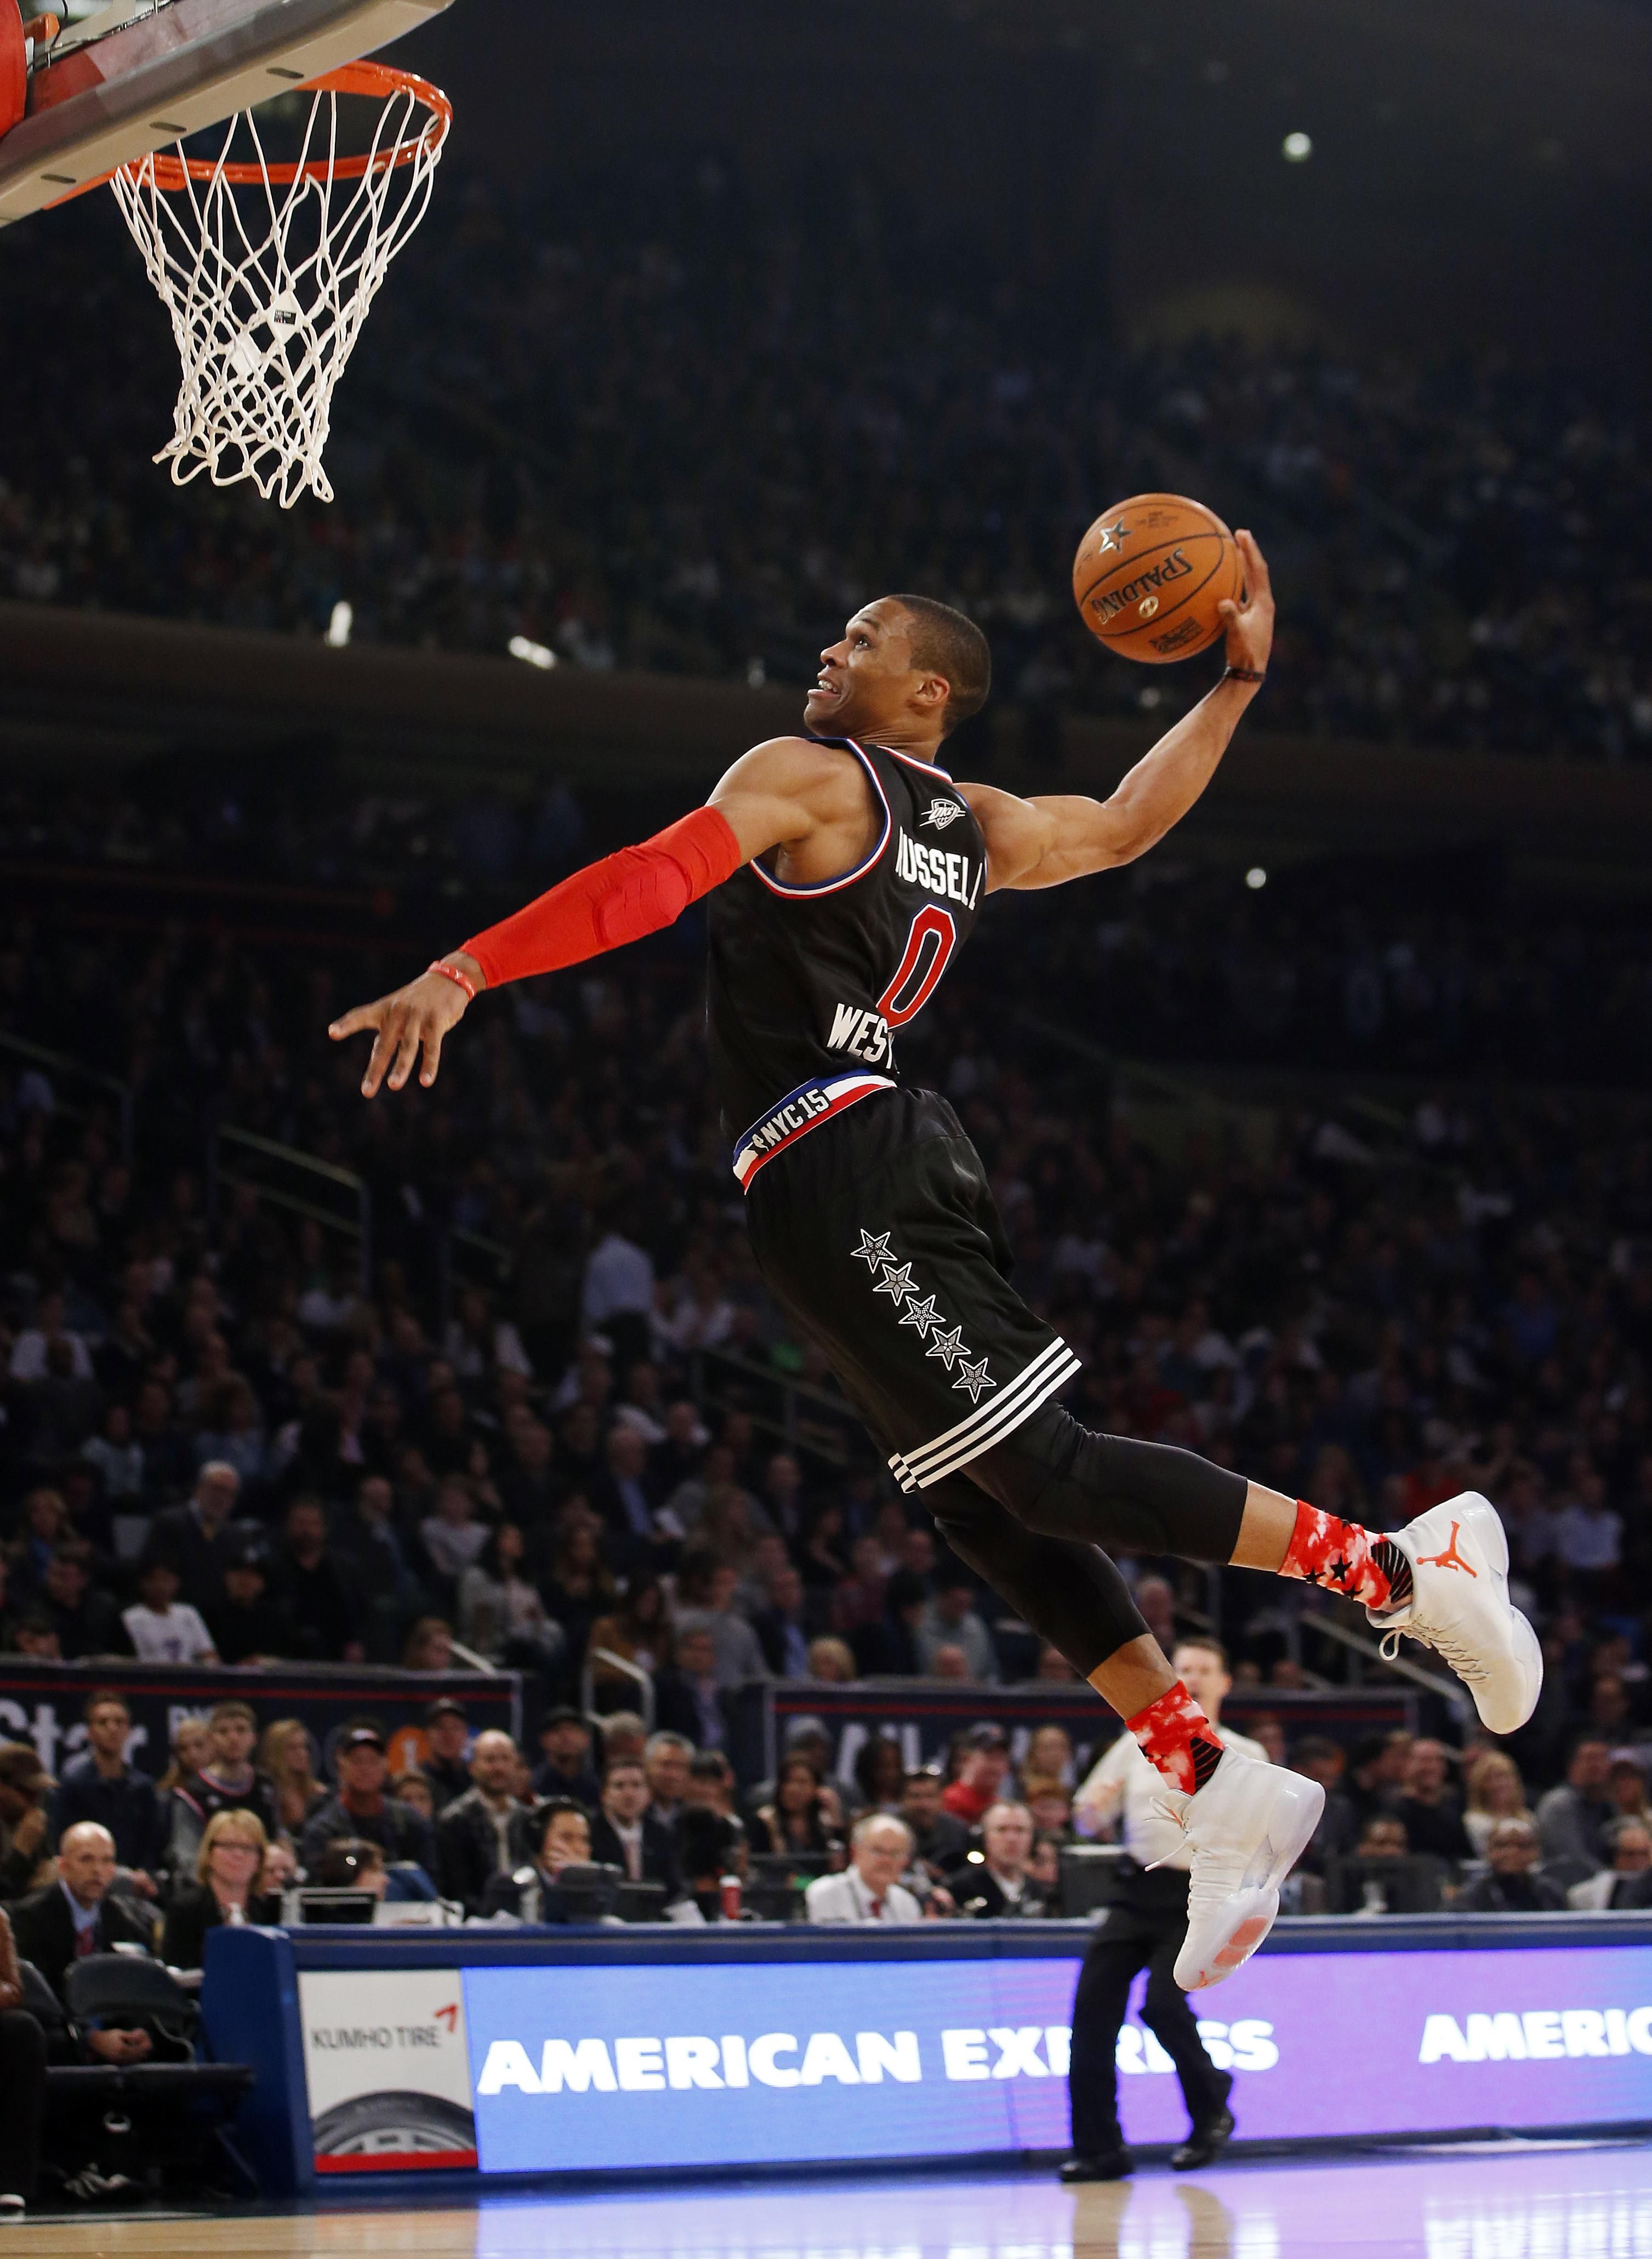 russell westbrook dunk tapete,basketball bewegt sich,sport,basketball spieler,basketball,slam dunk